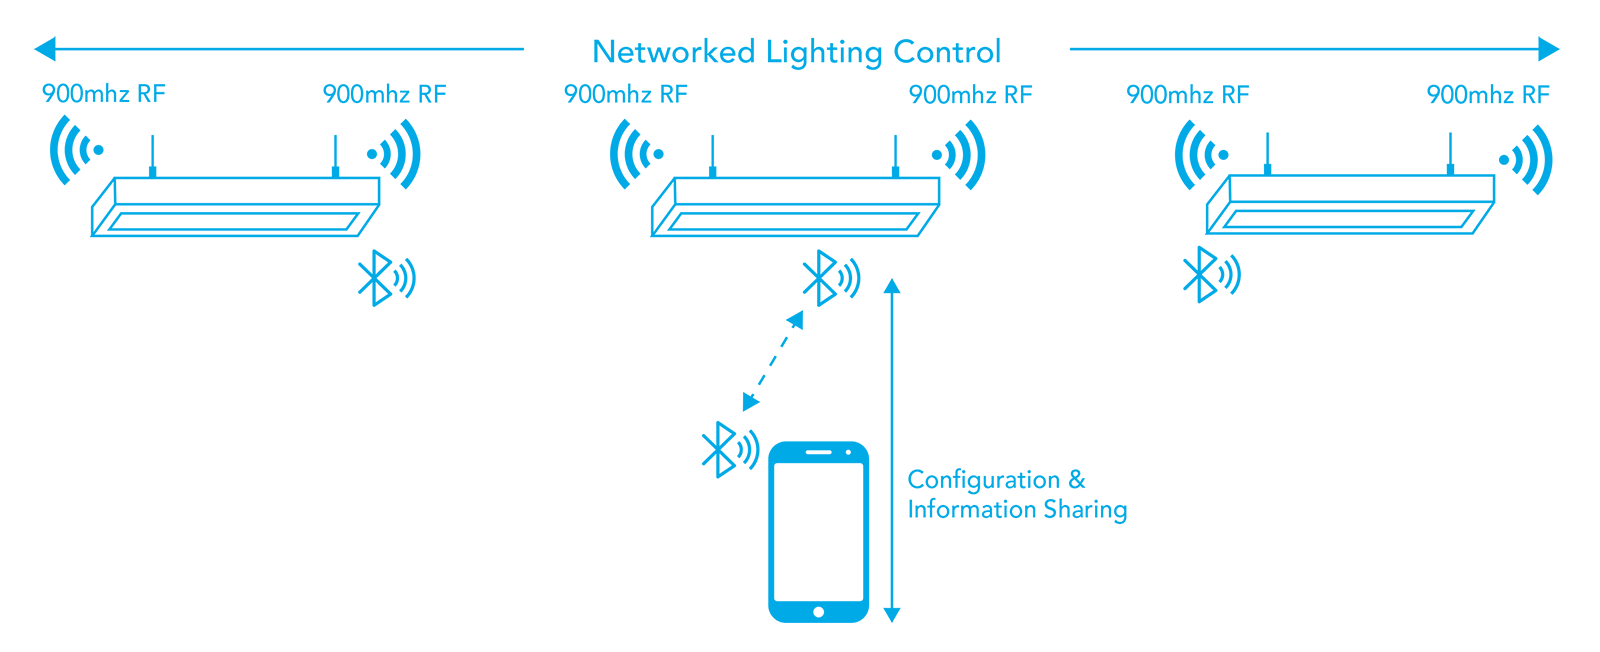 An illustration shows how networked wireless lighting controls utilize Bluetooth via the light and a smart phone in order to allow for configuration and information sharing.